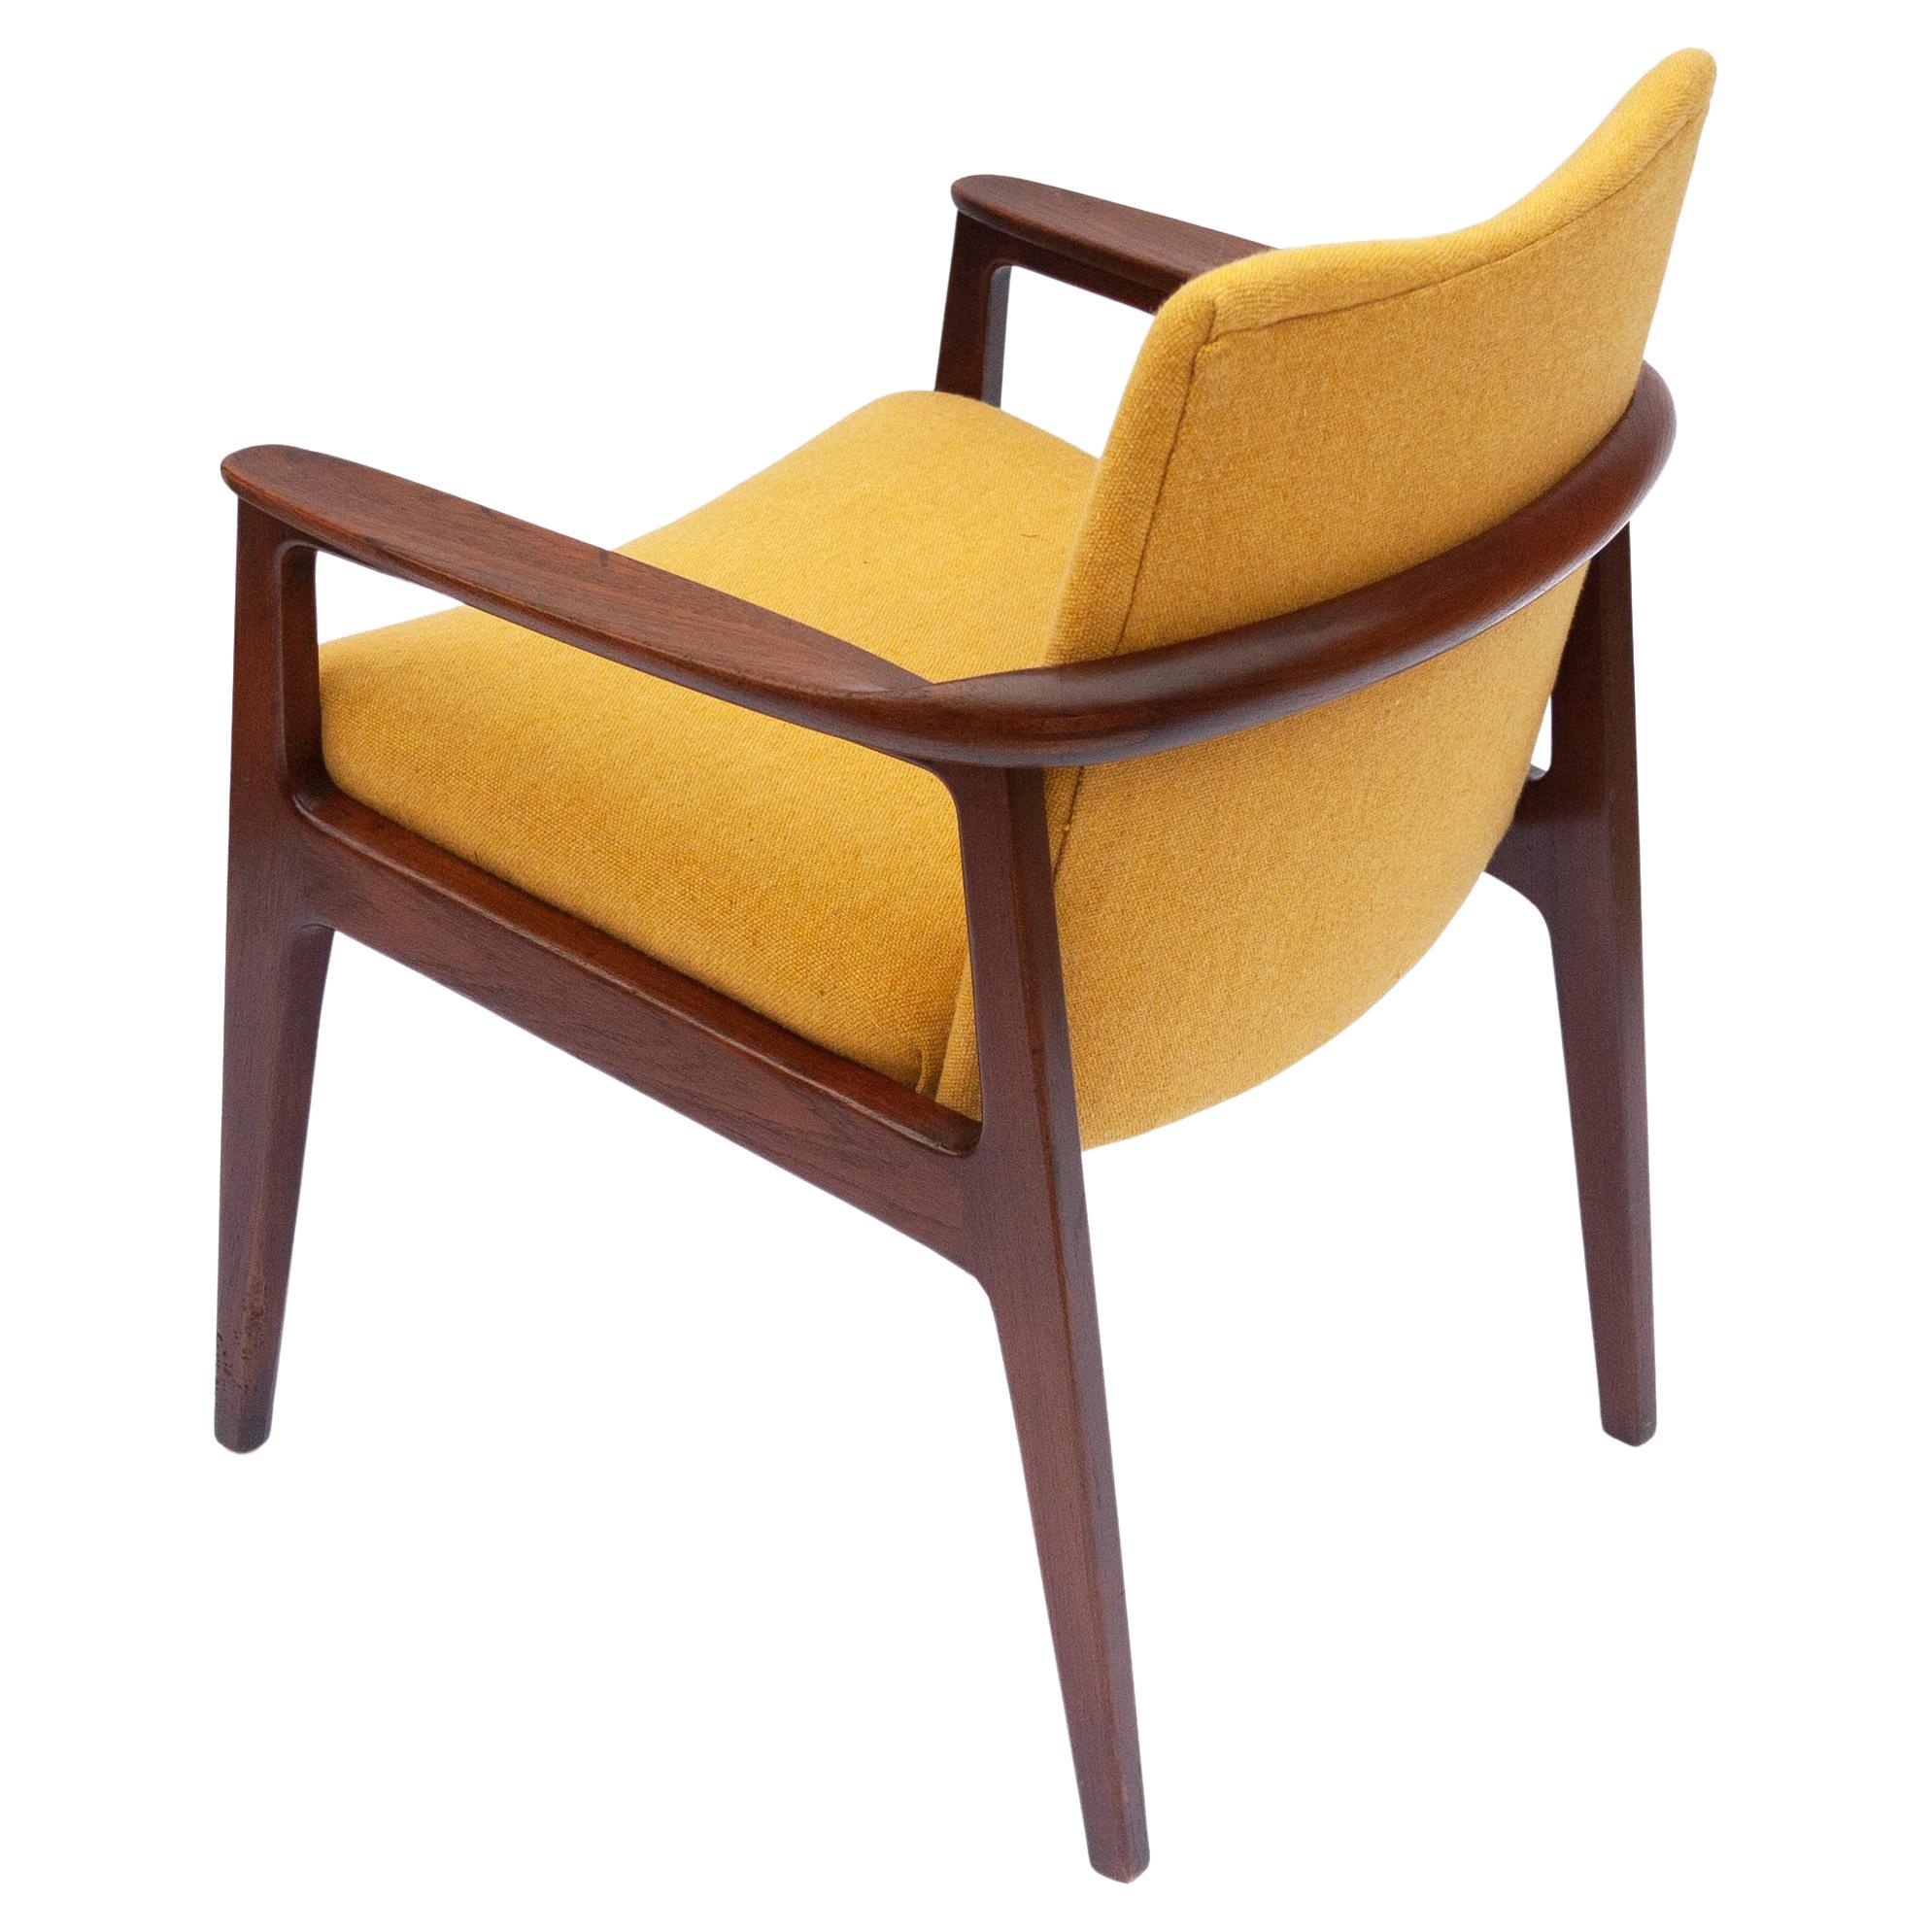 Mid-Century Teak Armchair with Yellow Upholstery by Sigvard Bernadotte